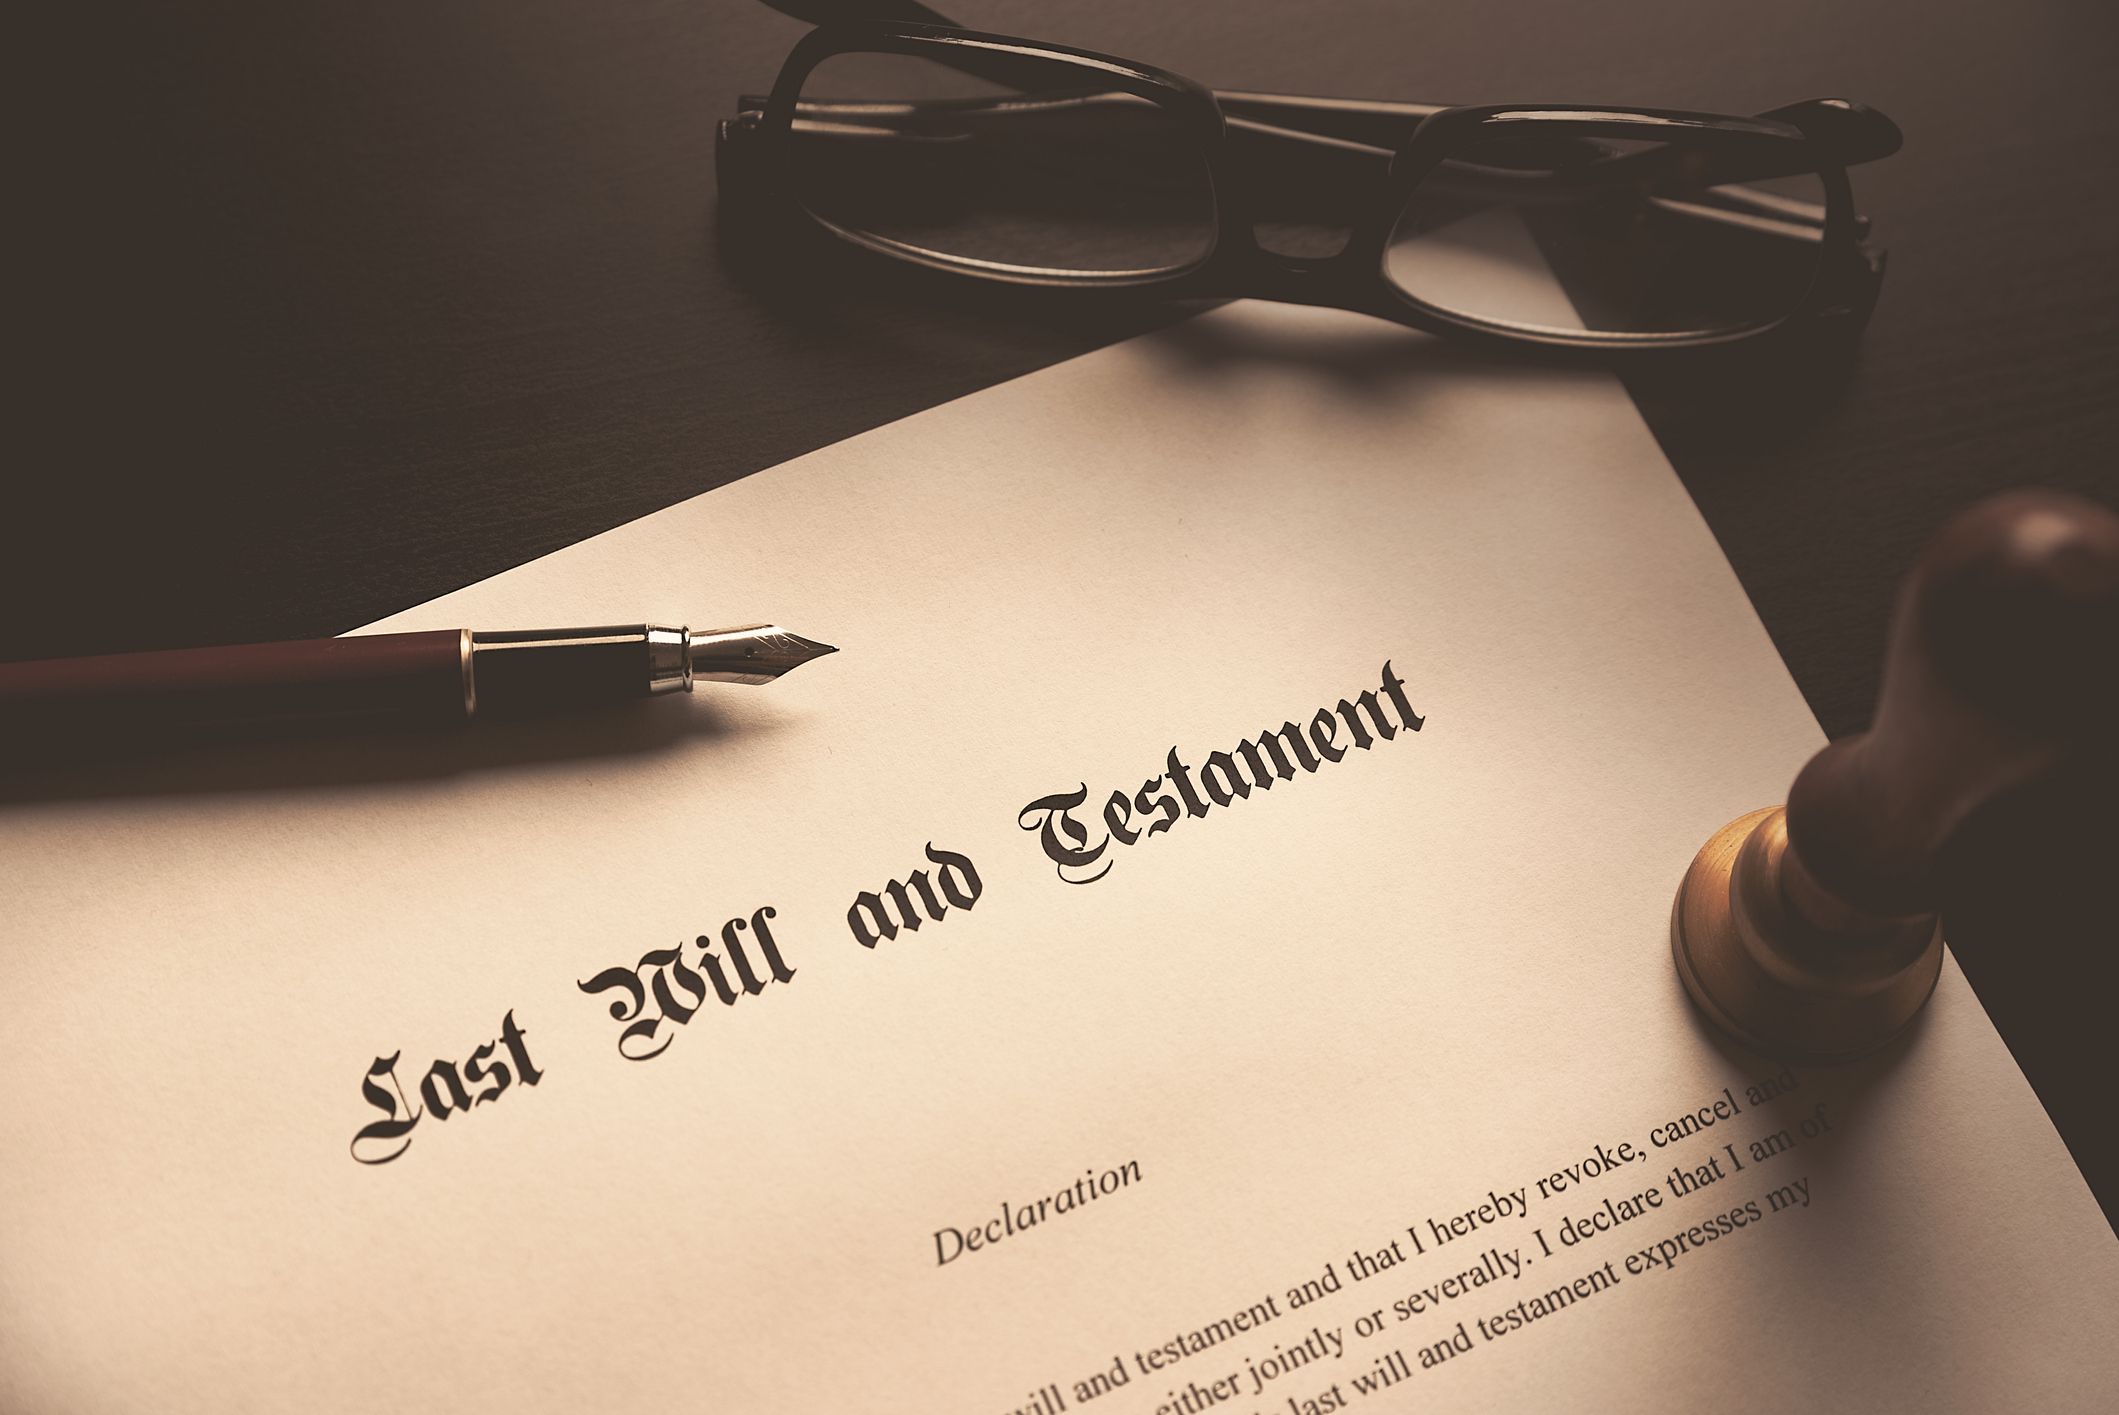 Do you really need to create online wills?